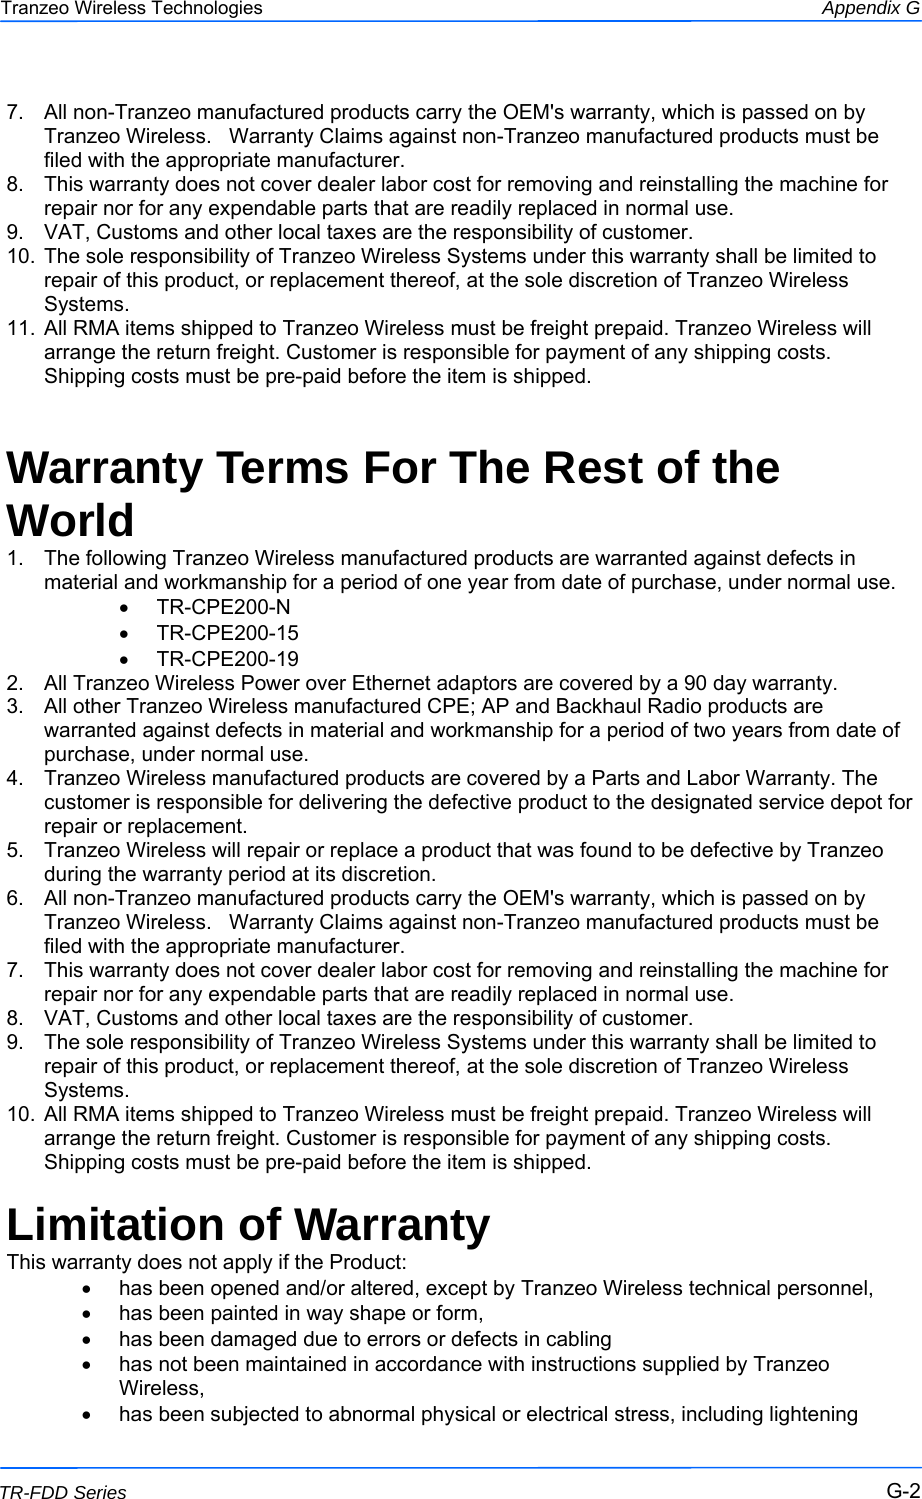  222 This document is intended for Public Distribution                         19473 Fraser Way, Pitt Meadows, B.C. Canada V3Y  2V4 Appendix G G-2 TR-FDD Series Tranzeo Wireless Technologies 7.  All non-Tranzeo manufactured products carry the OEM&apos;s warranty, which is passed on by Tranzeo Wireless.   Warranty Claims against non-Tranzeo manufactured products must be filed with the appropriate manufacturer. 8.  This warranty does not cover dealer labor cost for removing and reinstalling the machine for repair nor for any expendable parts that are readily replaced in normal use. 9.  VAT, Customs and other local taxes are the responsibility of customer. 10.  The sole responsibility of Tranzeo Wireless Systems under this warranty shall be limited to repair of this product, or replacement thereof, at the sole discretion of Tranzeo Wireless Systems. 11.  All RMA items shipped to Tranzeo Wireless must be freight prepaid. Tranzeo Wireless will arrange the return freight. Customer is responsible for payment of any shipping costs. Shipping costs must be pre-paid before the item is shipped.  Warranty Terms For The Rest of the World 1.  The following Tranzeo Wireless manufactured products are warranted against defects in material and workmanship for a period of one year from date of purchase, under normal use. •  TR-CPE200-N •  TR-CPE200-15 •  TR-CPE200-19 2.  All Tranzeo Wireless Power over Ethernet adaptors are covered by a 90 day warranty. 3.  All other Tranzeo Wireless manufactured CPE; AP and Backhaul Radio products are warranted against defects in material and workmanship for a period of two years from date of purchase, under normal use. 4.  Tranzeo Wireless manufactured products are covered by a Parts and Labor Warranty. The customer is responsible for delivering the defective product to the designated service depot for repair or replacement. 5.  Tranzeo Wireless will repair or replace a product that was found to be defective by Tranzeo during the warranty period at its discretion. 6.  All non-Tranzeo manufactured products carry the OEM&apos;s warranty, which is passed on by Tranzeo Wireless.   Warranty Claims against non-Tranzeo manufactured products must be filed with the appropriate manufacturer. 7.  This warranty does not cover dealer labor cost for removing and reinstalling the machine for repair nor for any expendable parts that are readily replaced in normal use. 8.  VAT, Customs and other local taxes are the responsibility of customer. 9.  The sole responsibility of Tranzeo Wireless Systems under this warranty shall be limited to repair of this product, or replacement thereof, at the sole discretion of Tranzeo Wireless Systems. 10.  All RMA items shipped to Tranzeo Wireless must be freight prepaid. Tranzeo Wireless will arrange the return freight. Customer is responsible for payment of any shipping costs. Shipping costs must be pre-paid before the item is shipped.  Limitation of Warranty This warranty does not apply if the Product: •  has been opened and/or altered, except by Tranzeo Wireless technical personnel, •  has been painted in way shape or form, •  has been damaged due to errors or defects in cabling •  has not been maintained in accordance with instructions supplied by Tranzeo Wireless, •  has been subjected to abnormal physical or electrical stress, including lightening 